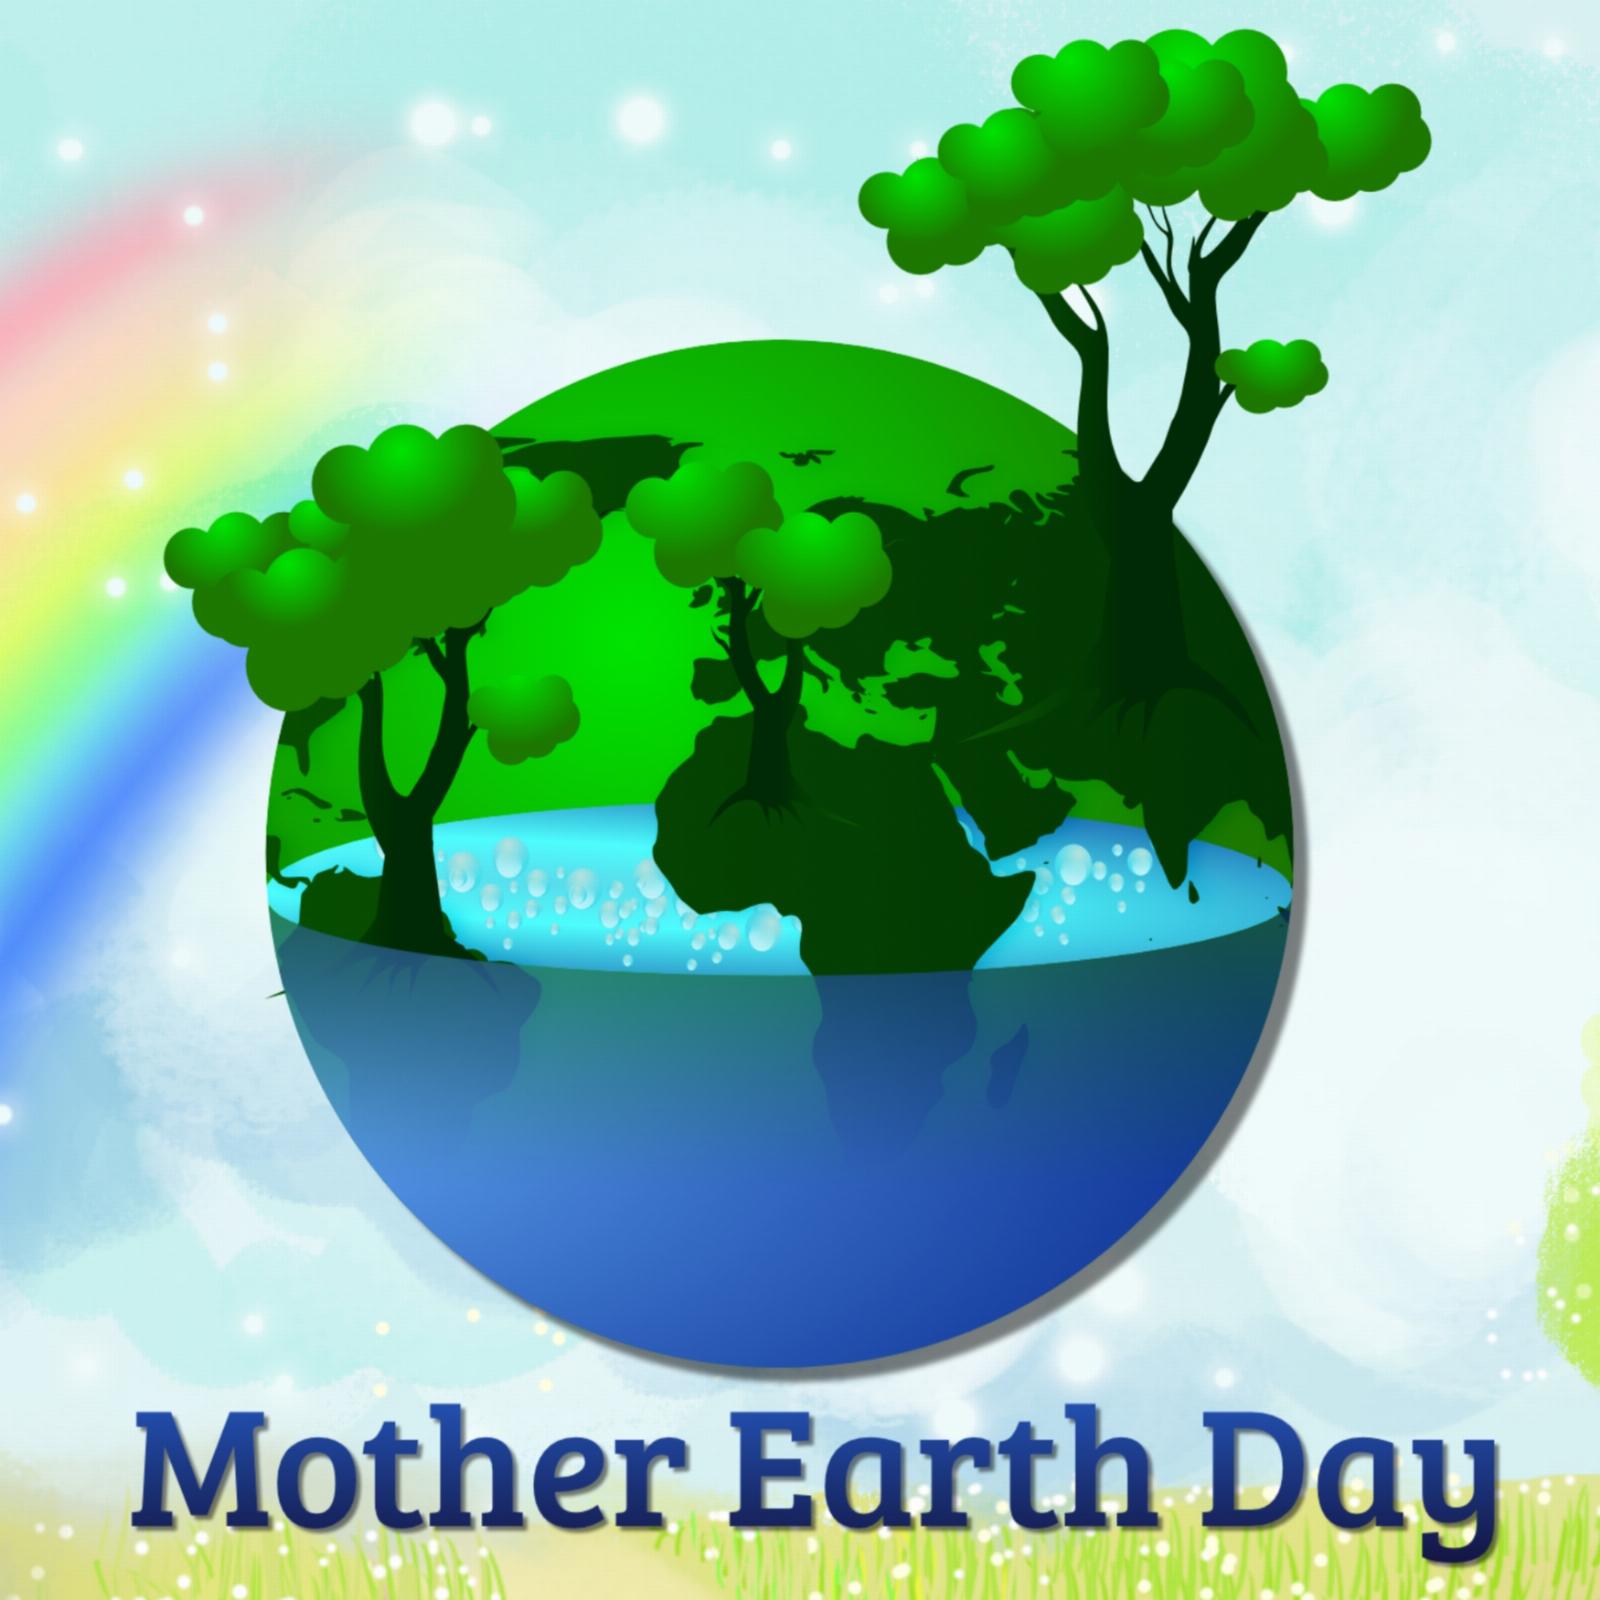 Mother Earth Day Images